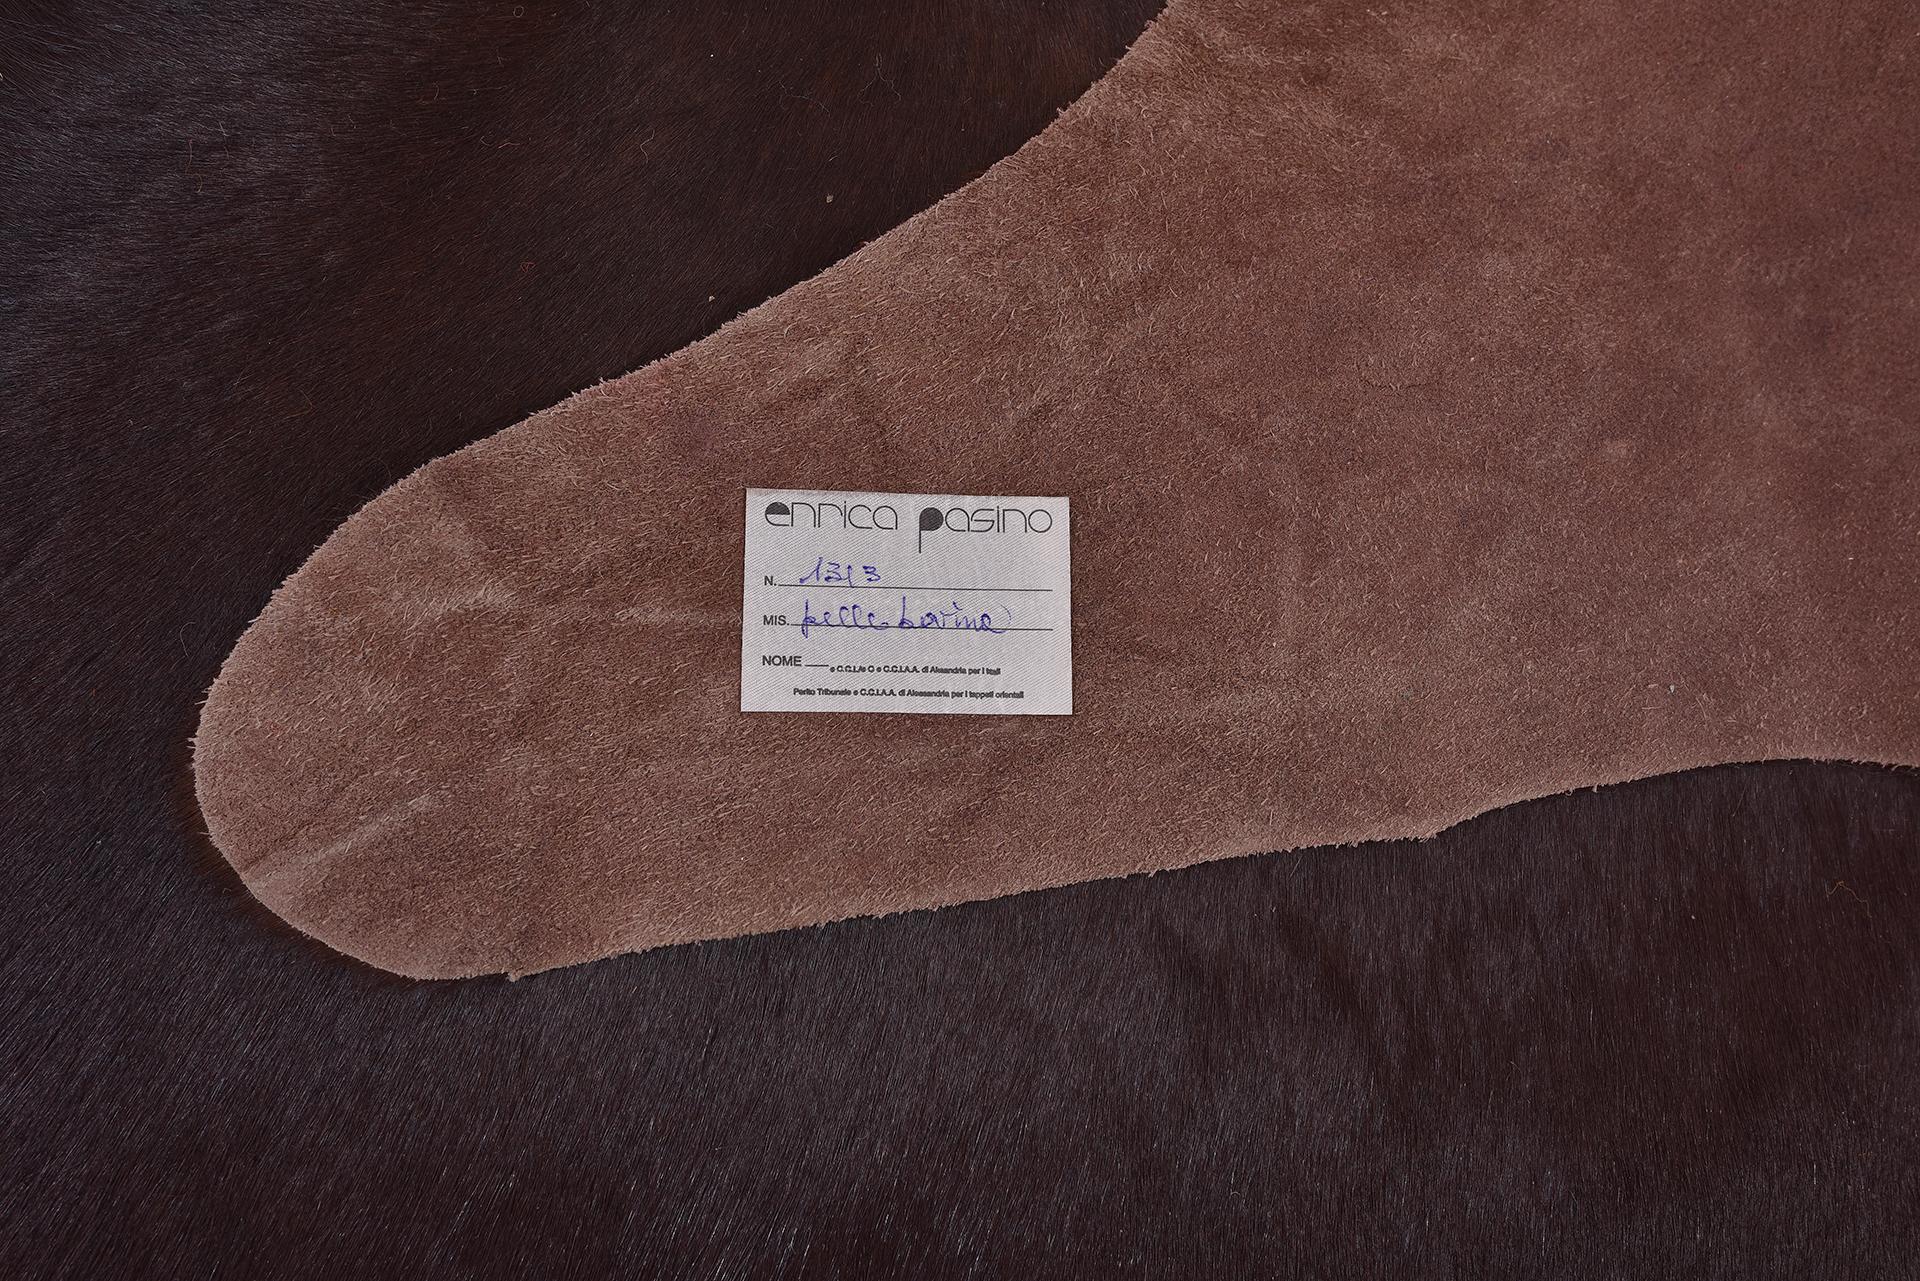 nr. 1313 - Bovine leather in natural color: the edges have no waviness and adhere perfectly to the floor.
Now with an interesting price because I want to close my activities.